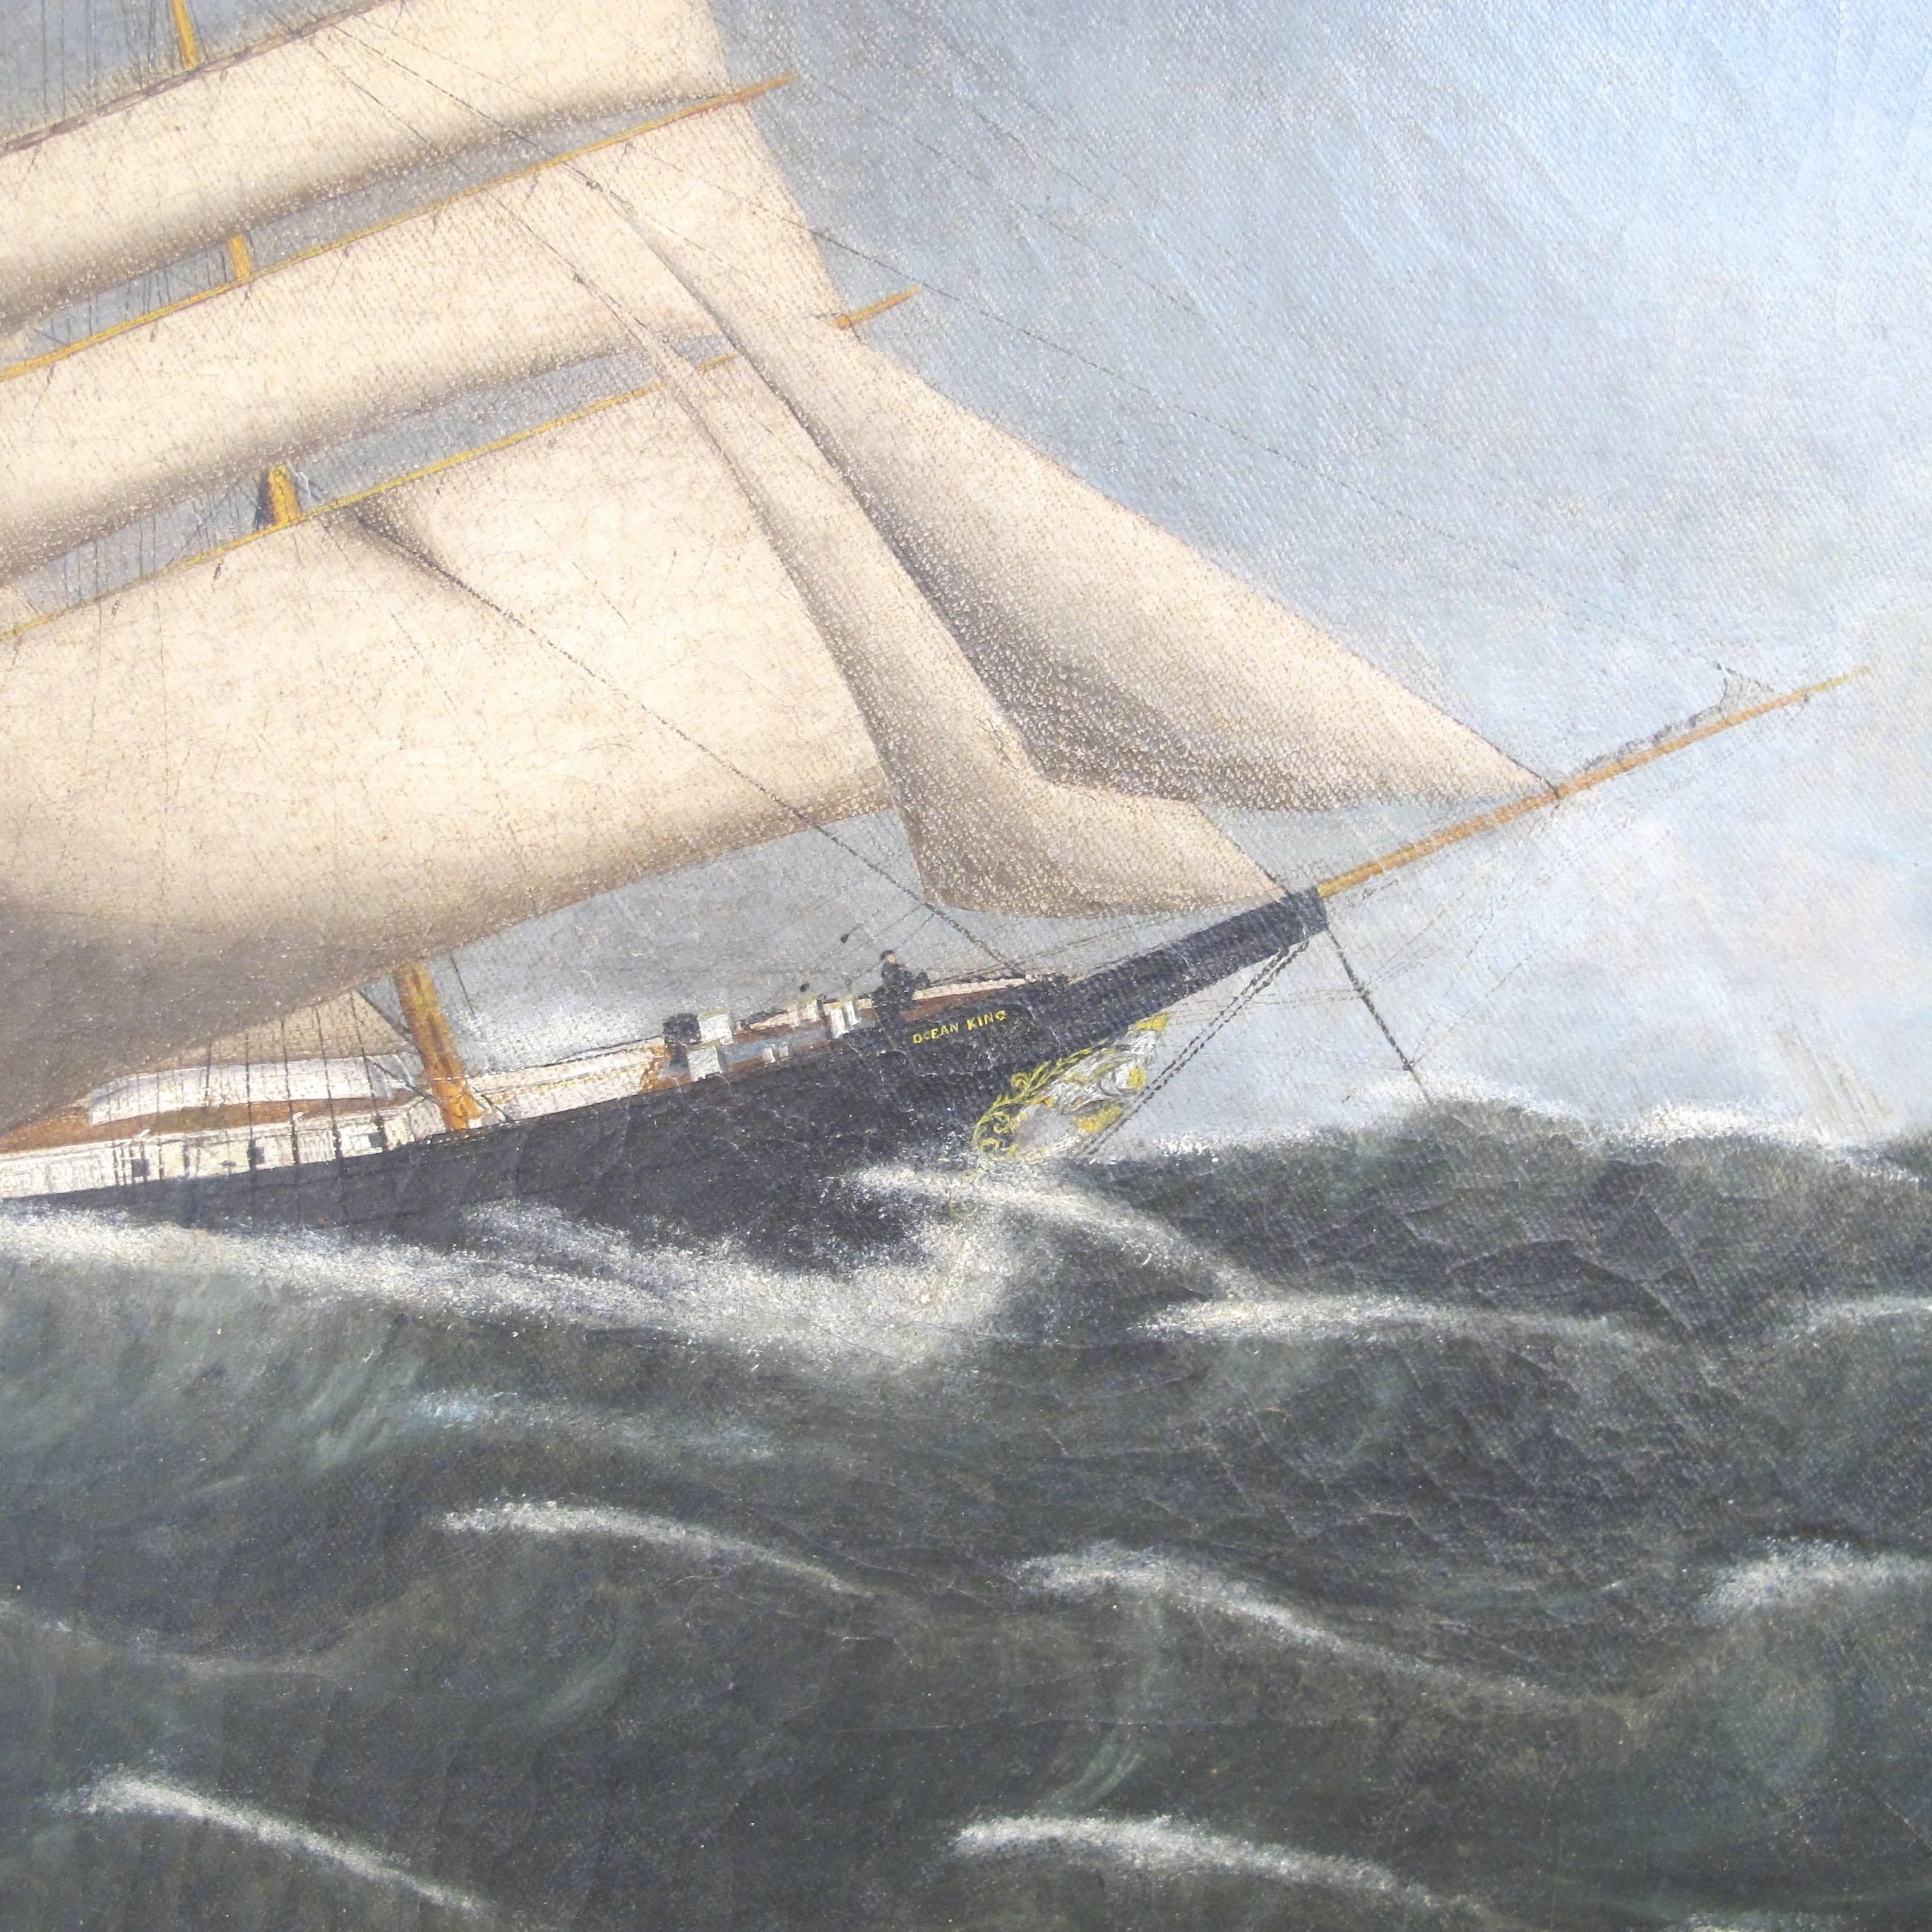 American Ship Oil Painting, 19th Century Maritime 1